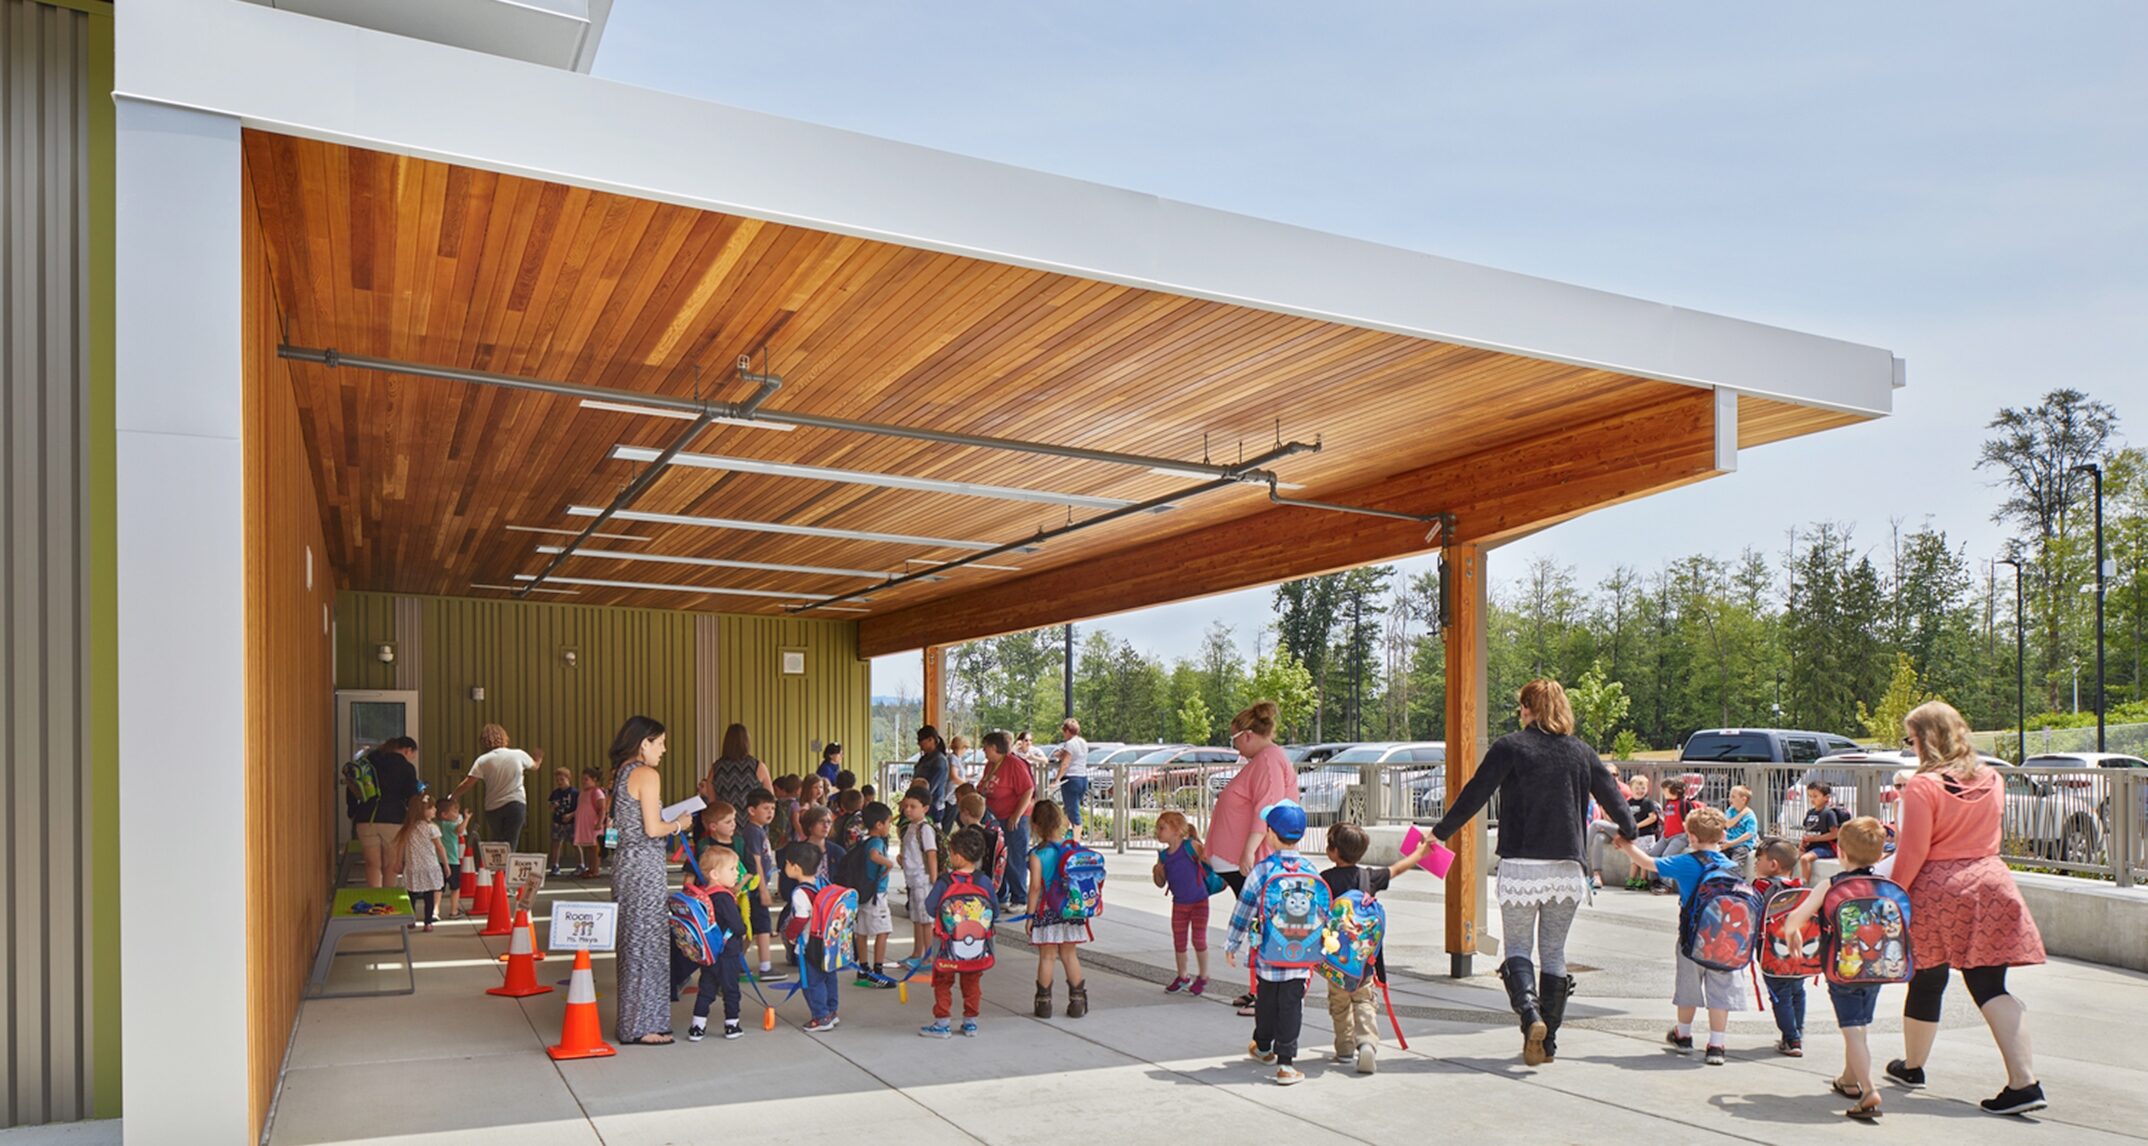 Drop off and pick up can occur in a variety of ways for early learners, but all pre-K students must have adult escorts. Providing queuing space is critical to facilitate student tracking, and allow entering the building in an orderly fashion. – Lake Stevens Early Learning Center